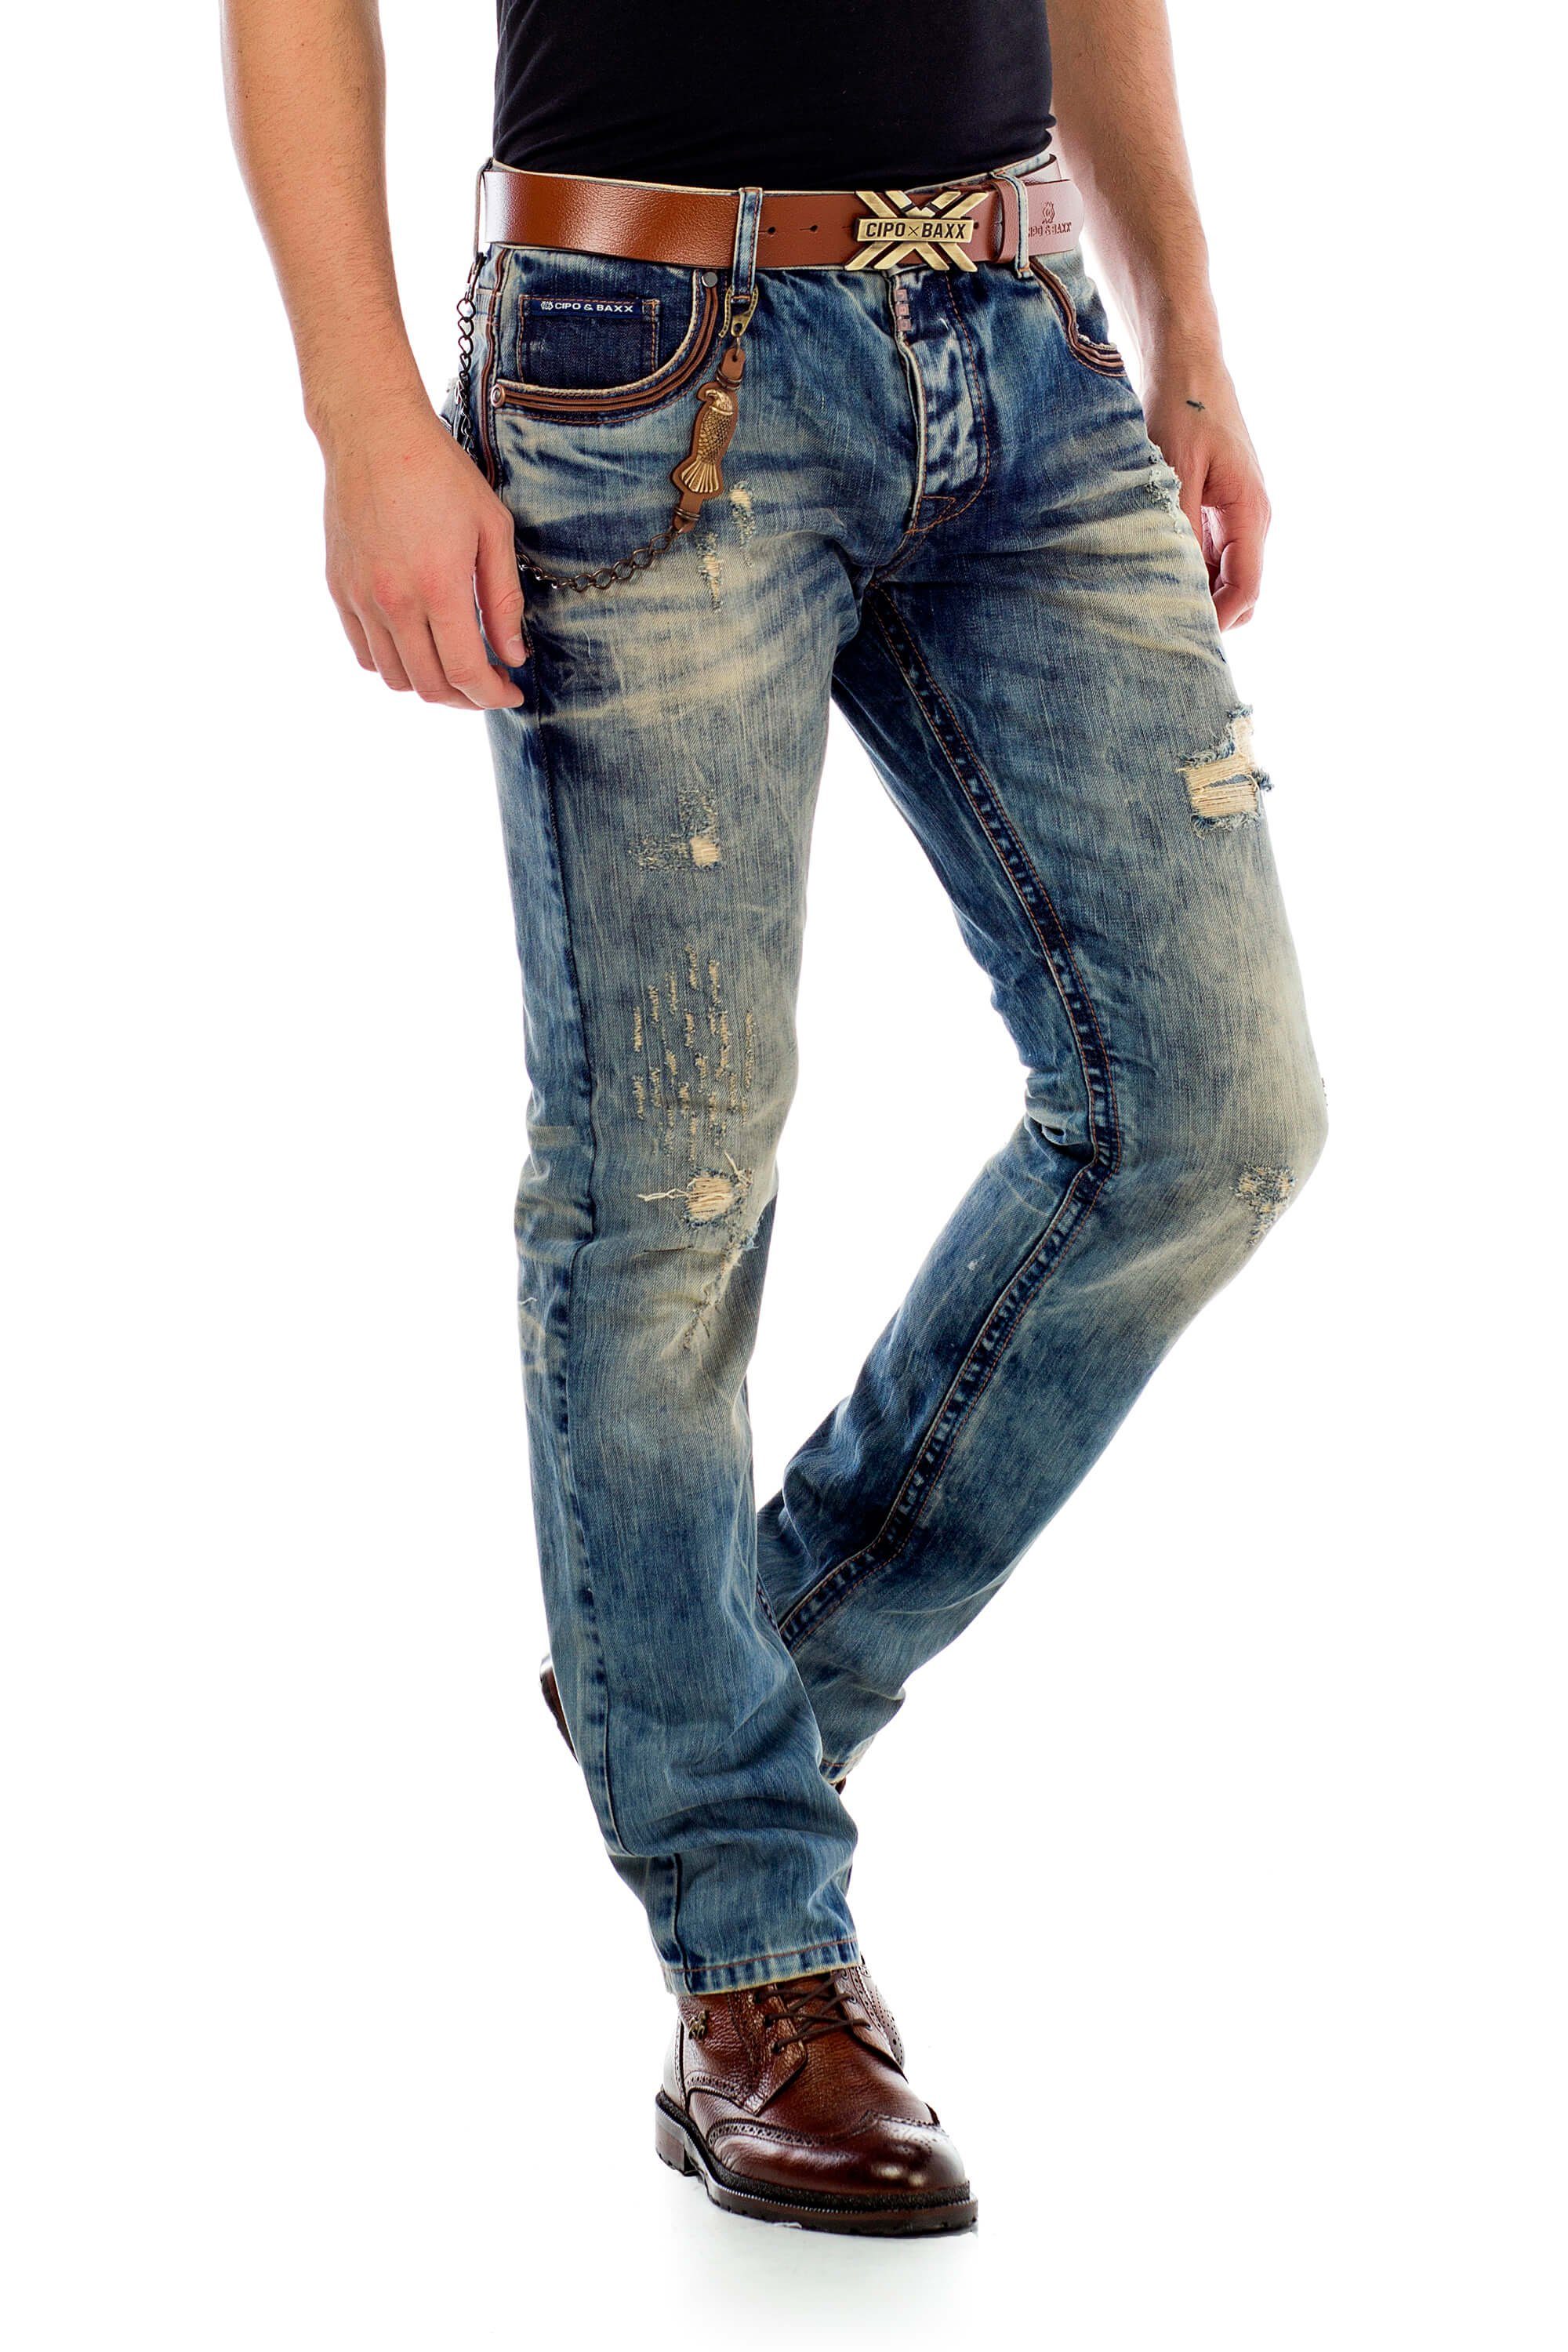 Neueste Produkte aus dem Ausland Cipo & Fit Used-Look Jeans in in Baxx Straight Bequeme coolem